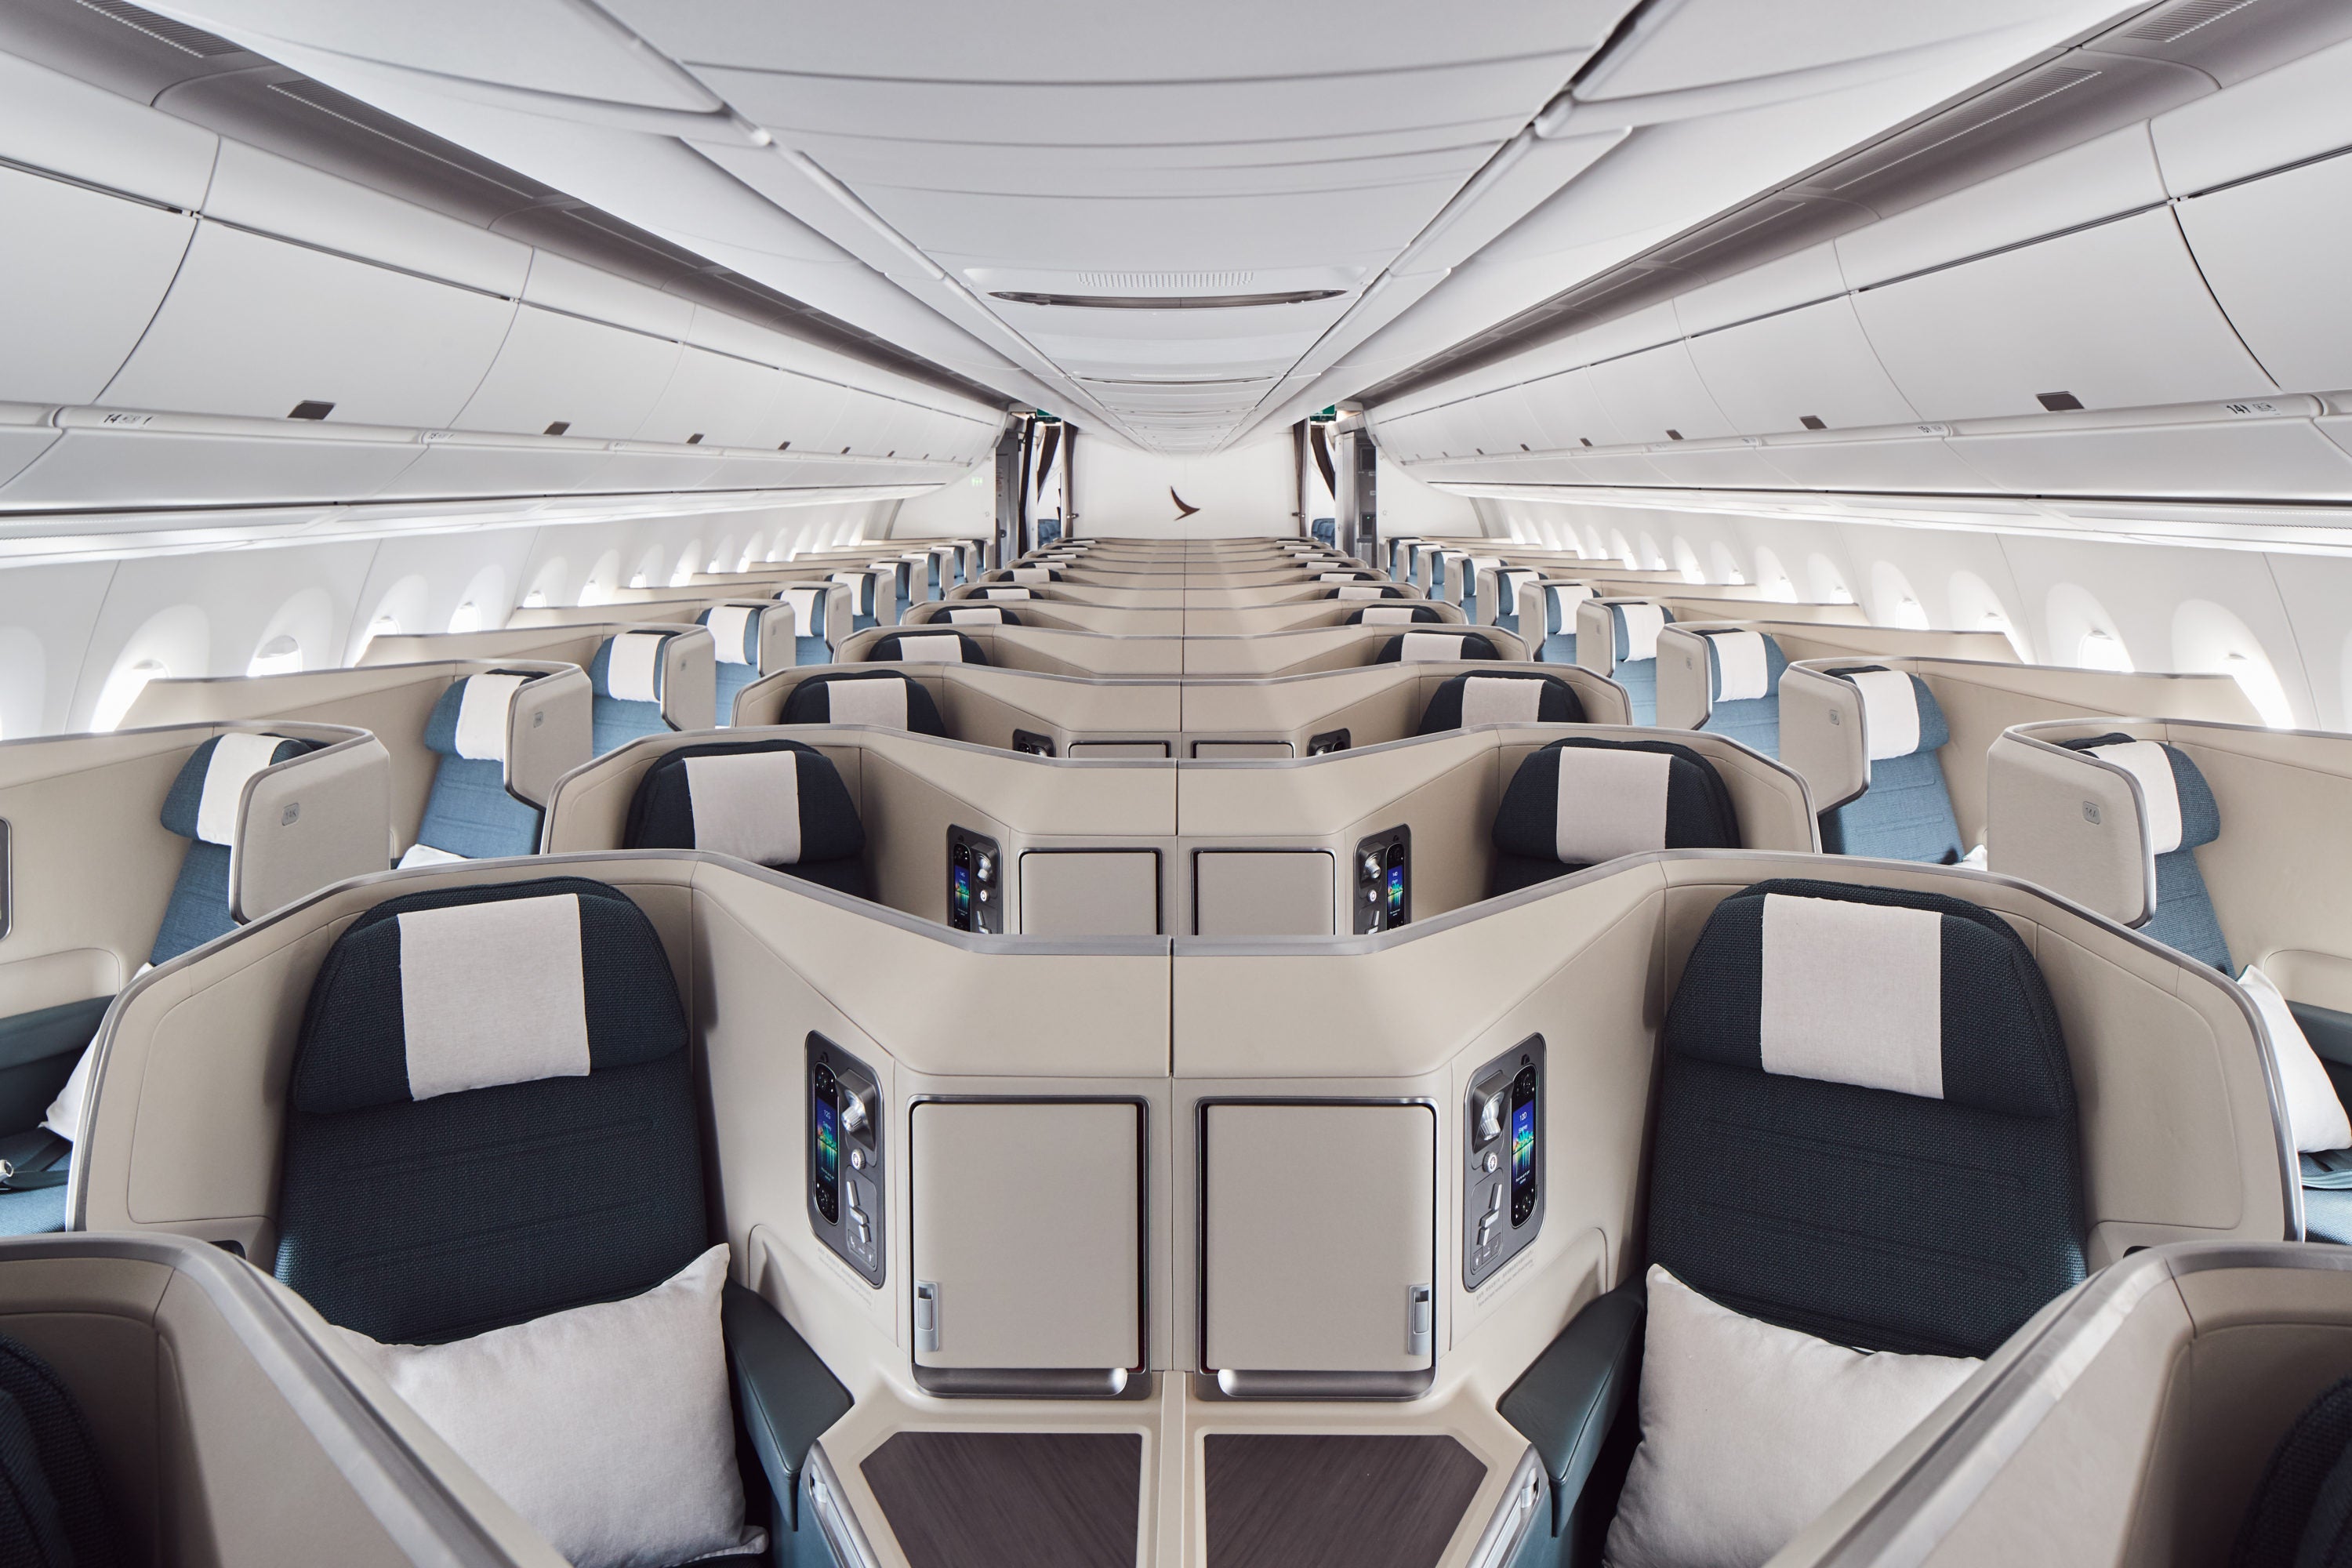 Cathay Pacific A350 business class